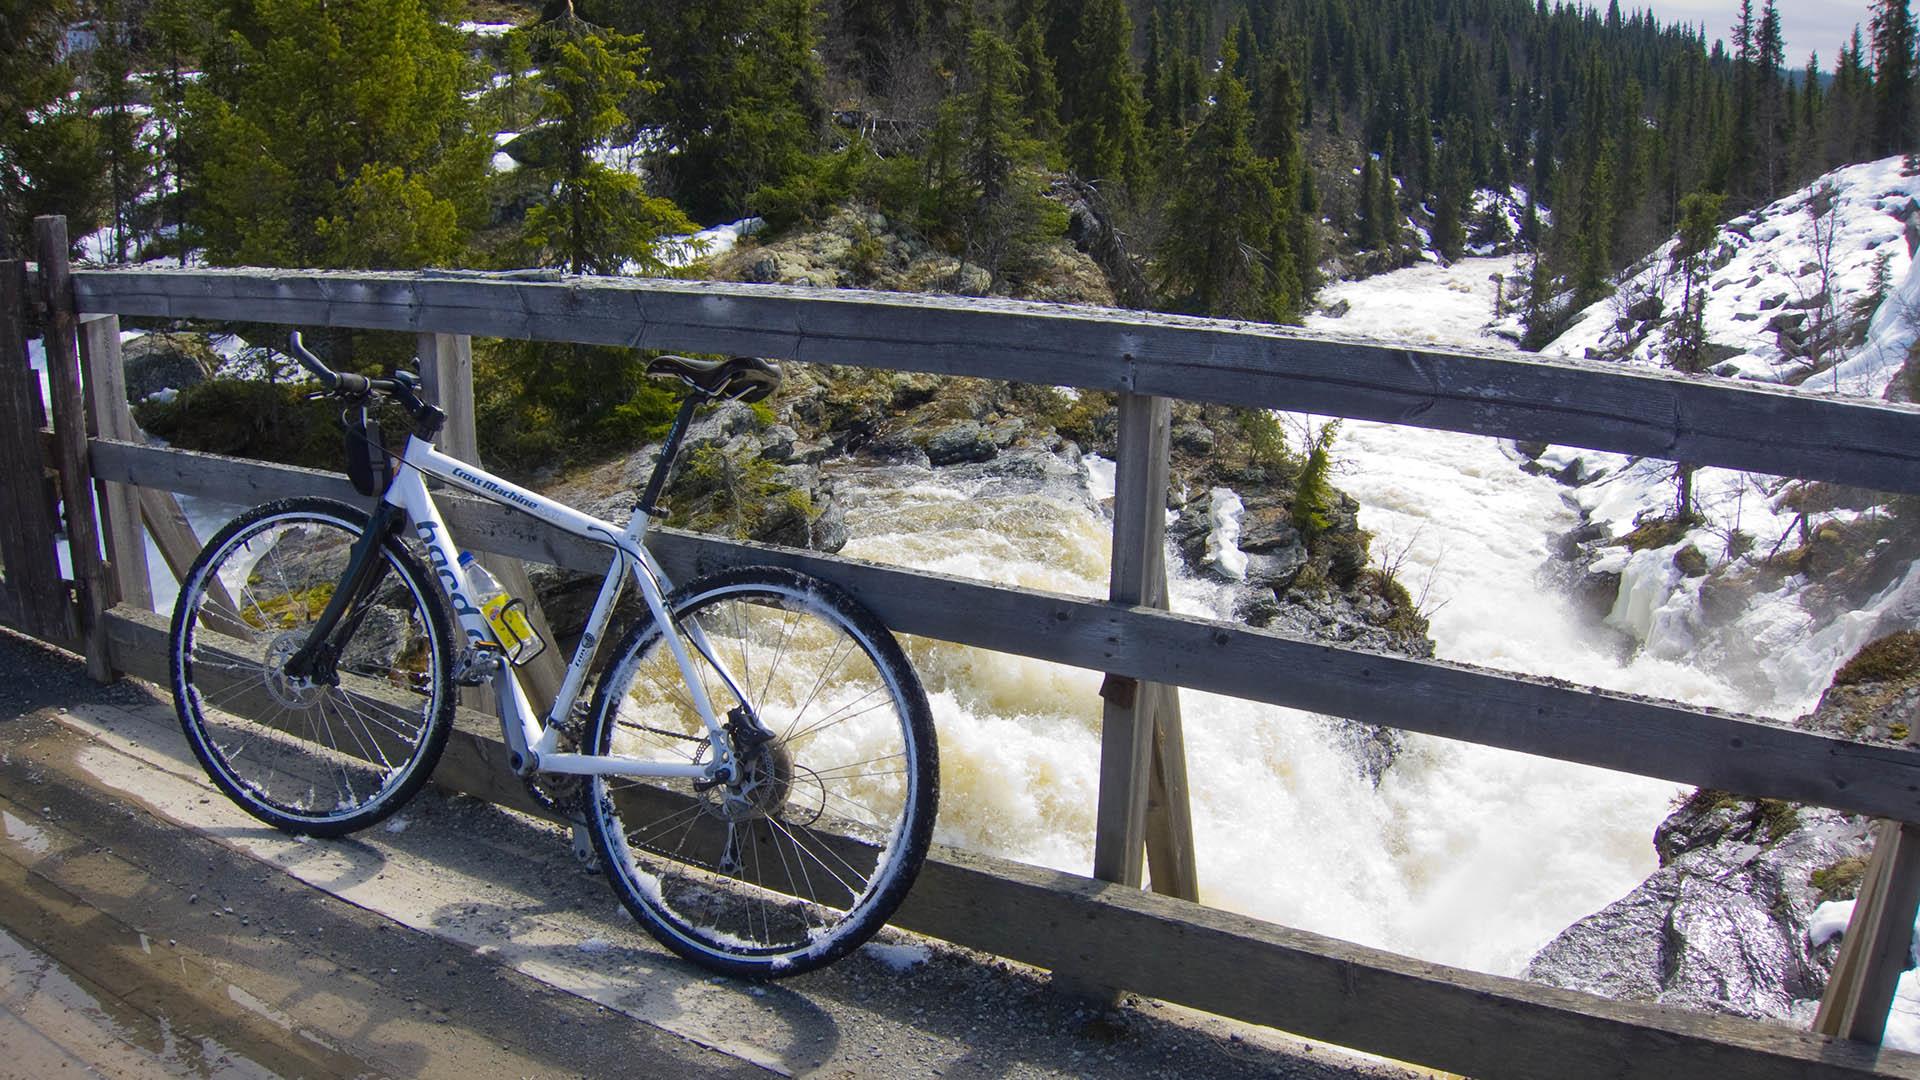 A bicycle on a wooden bridge over a whitewater river during snow melting.